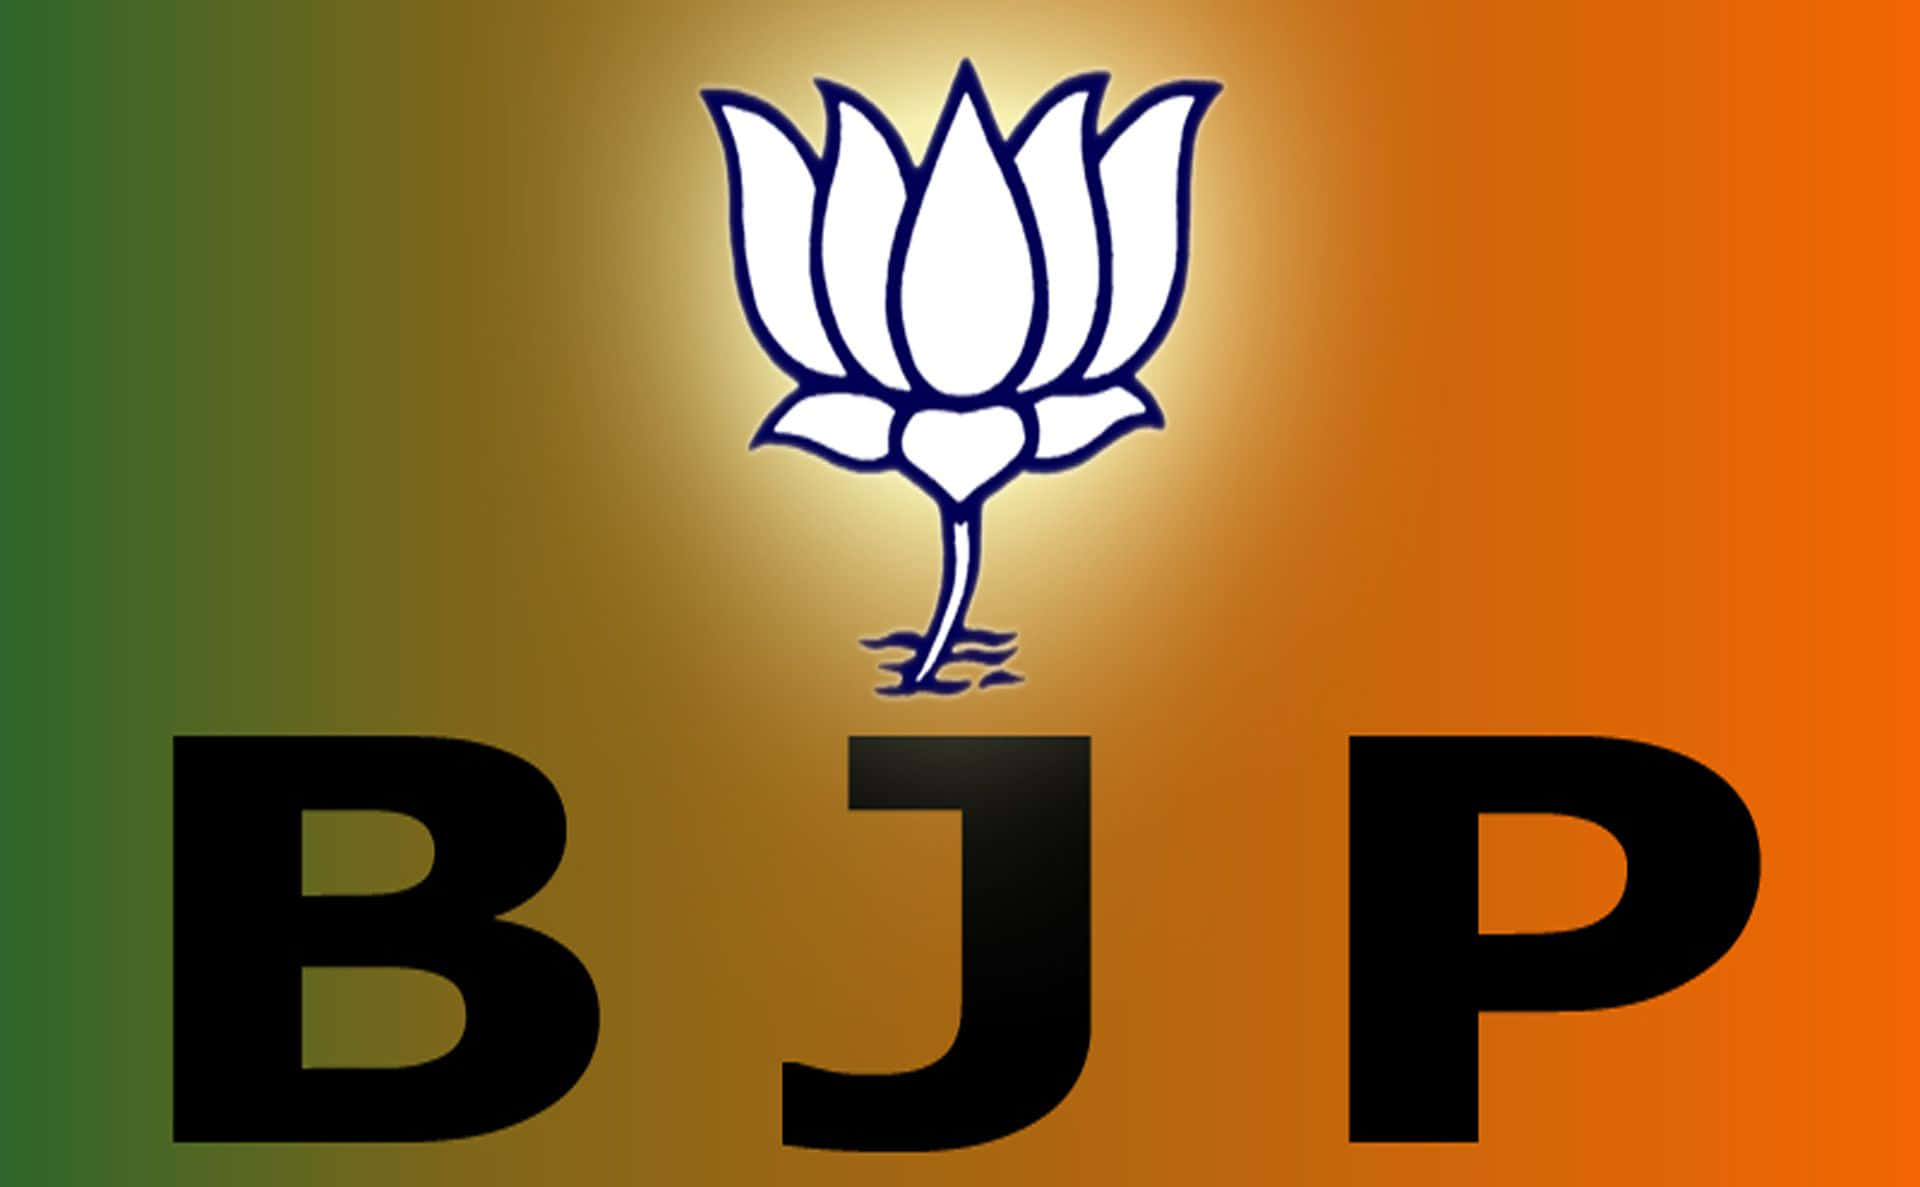 BJP Working Towards a Brighter India